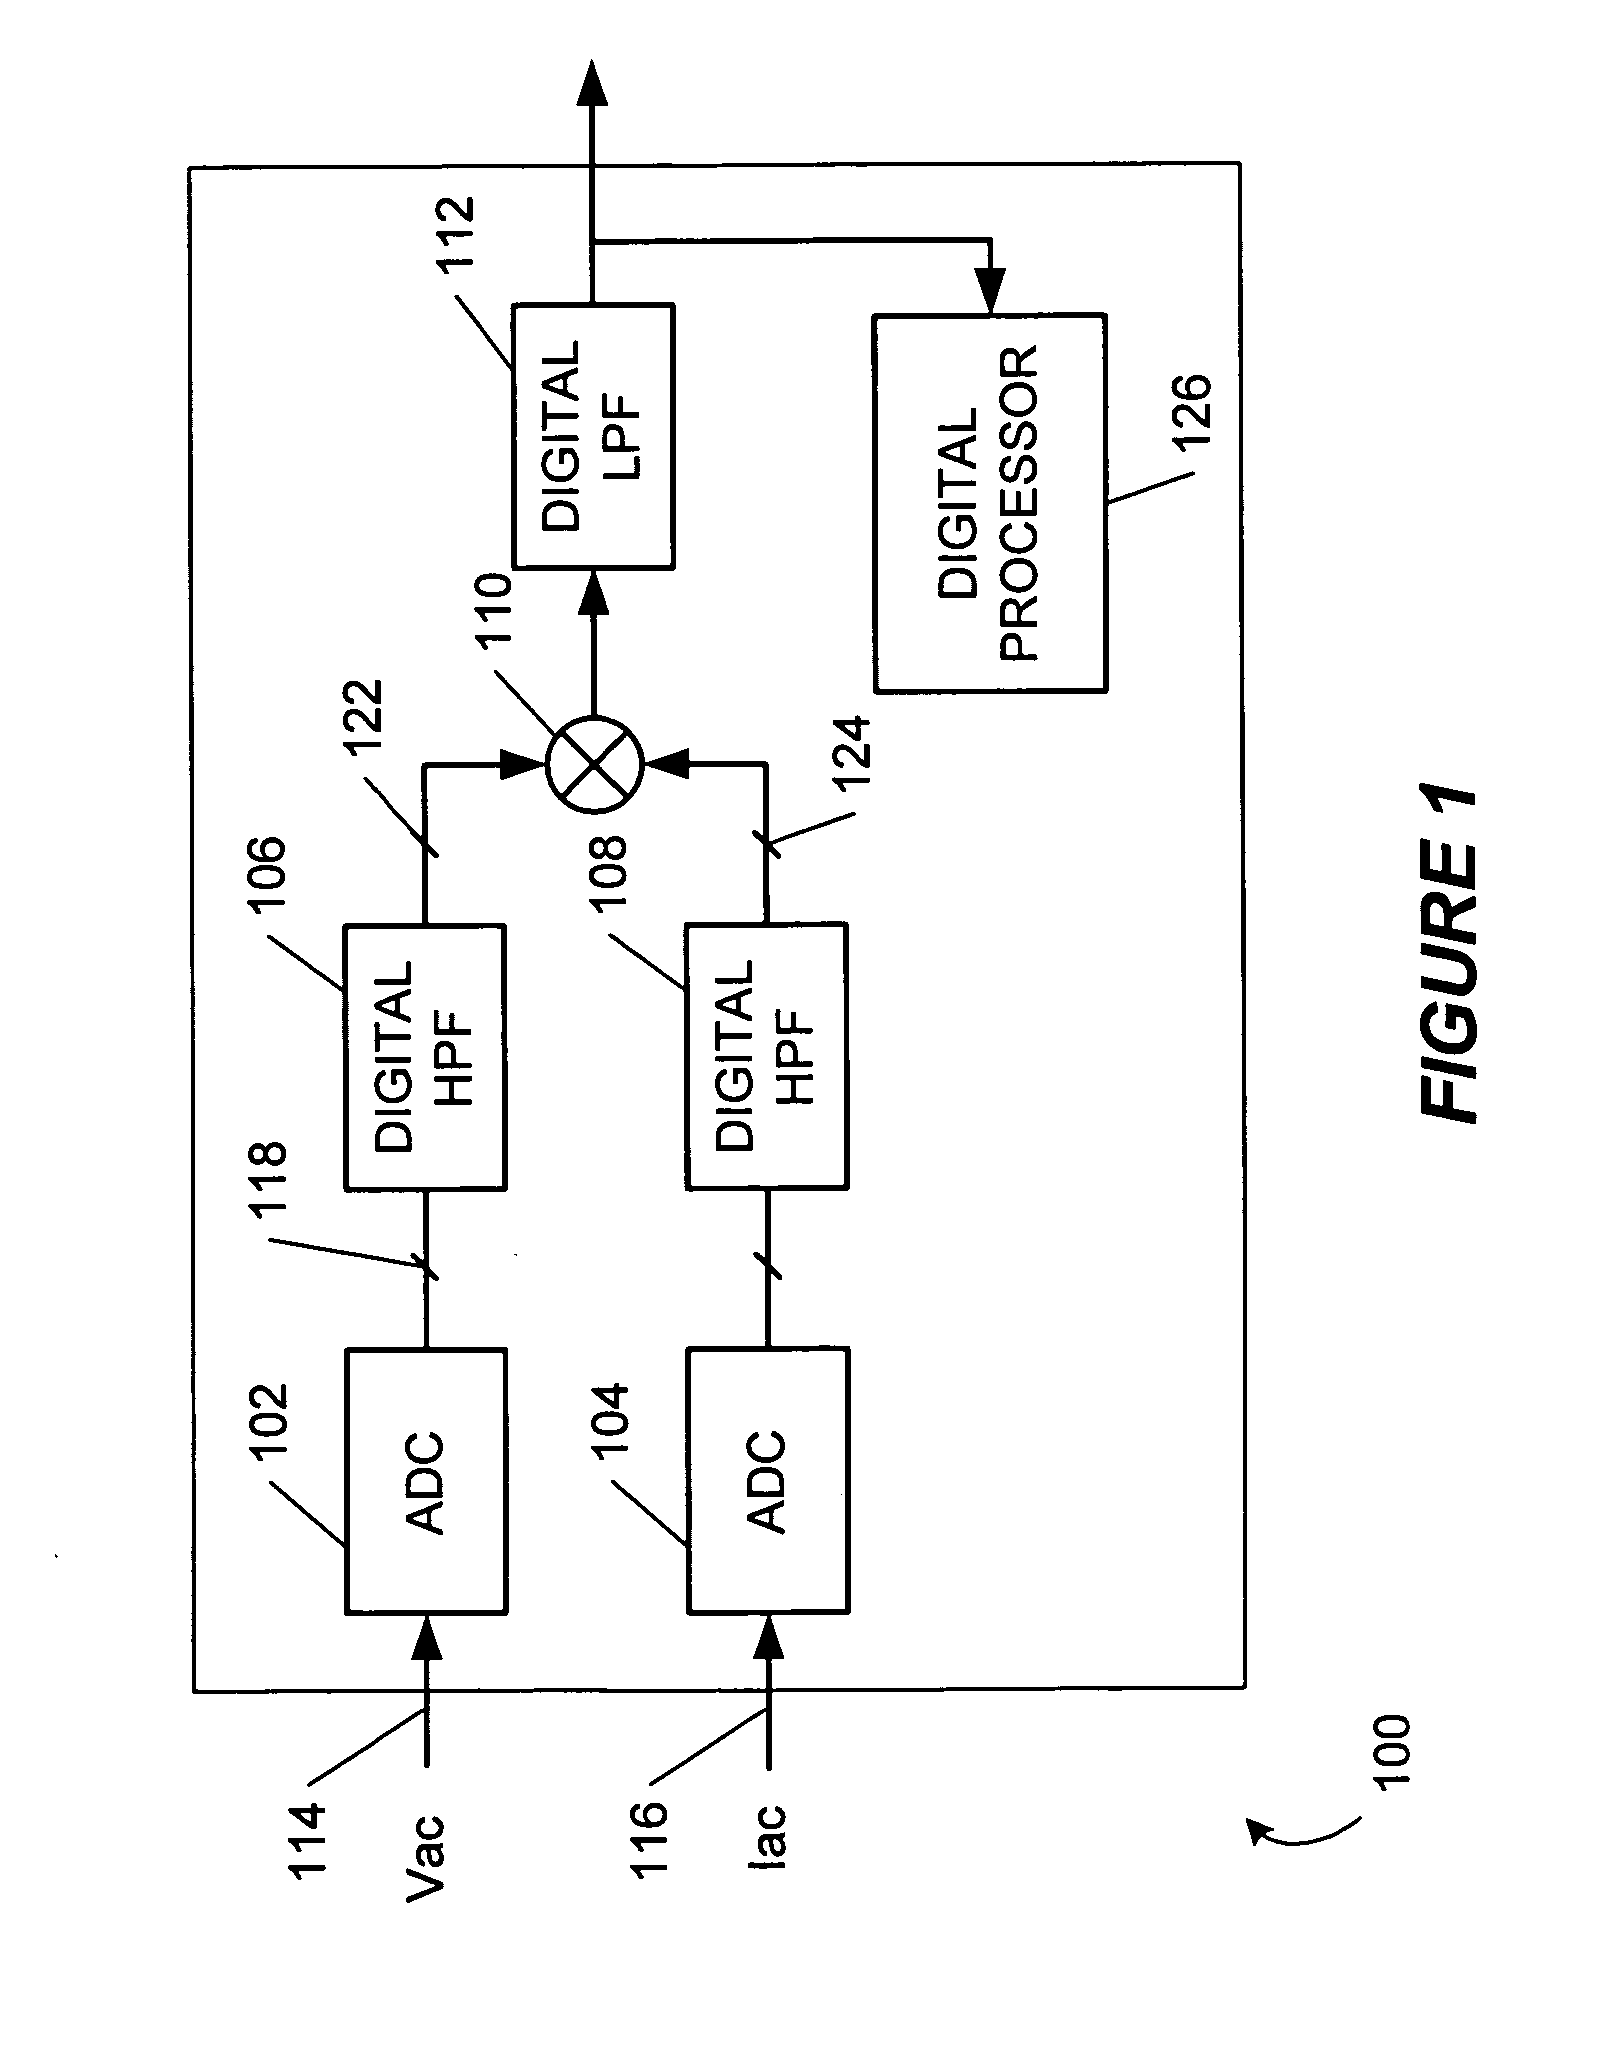 Direct current offset cancellation and phase equalization for power metering devices